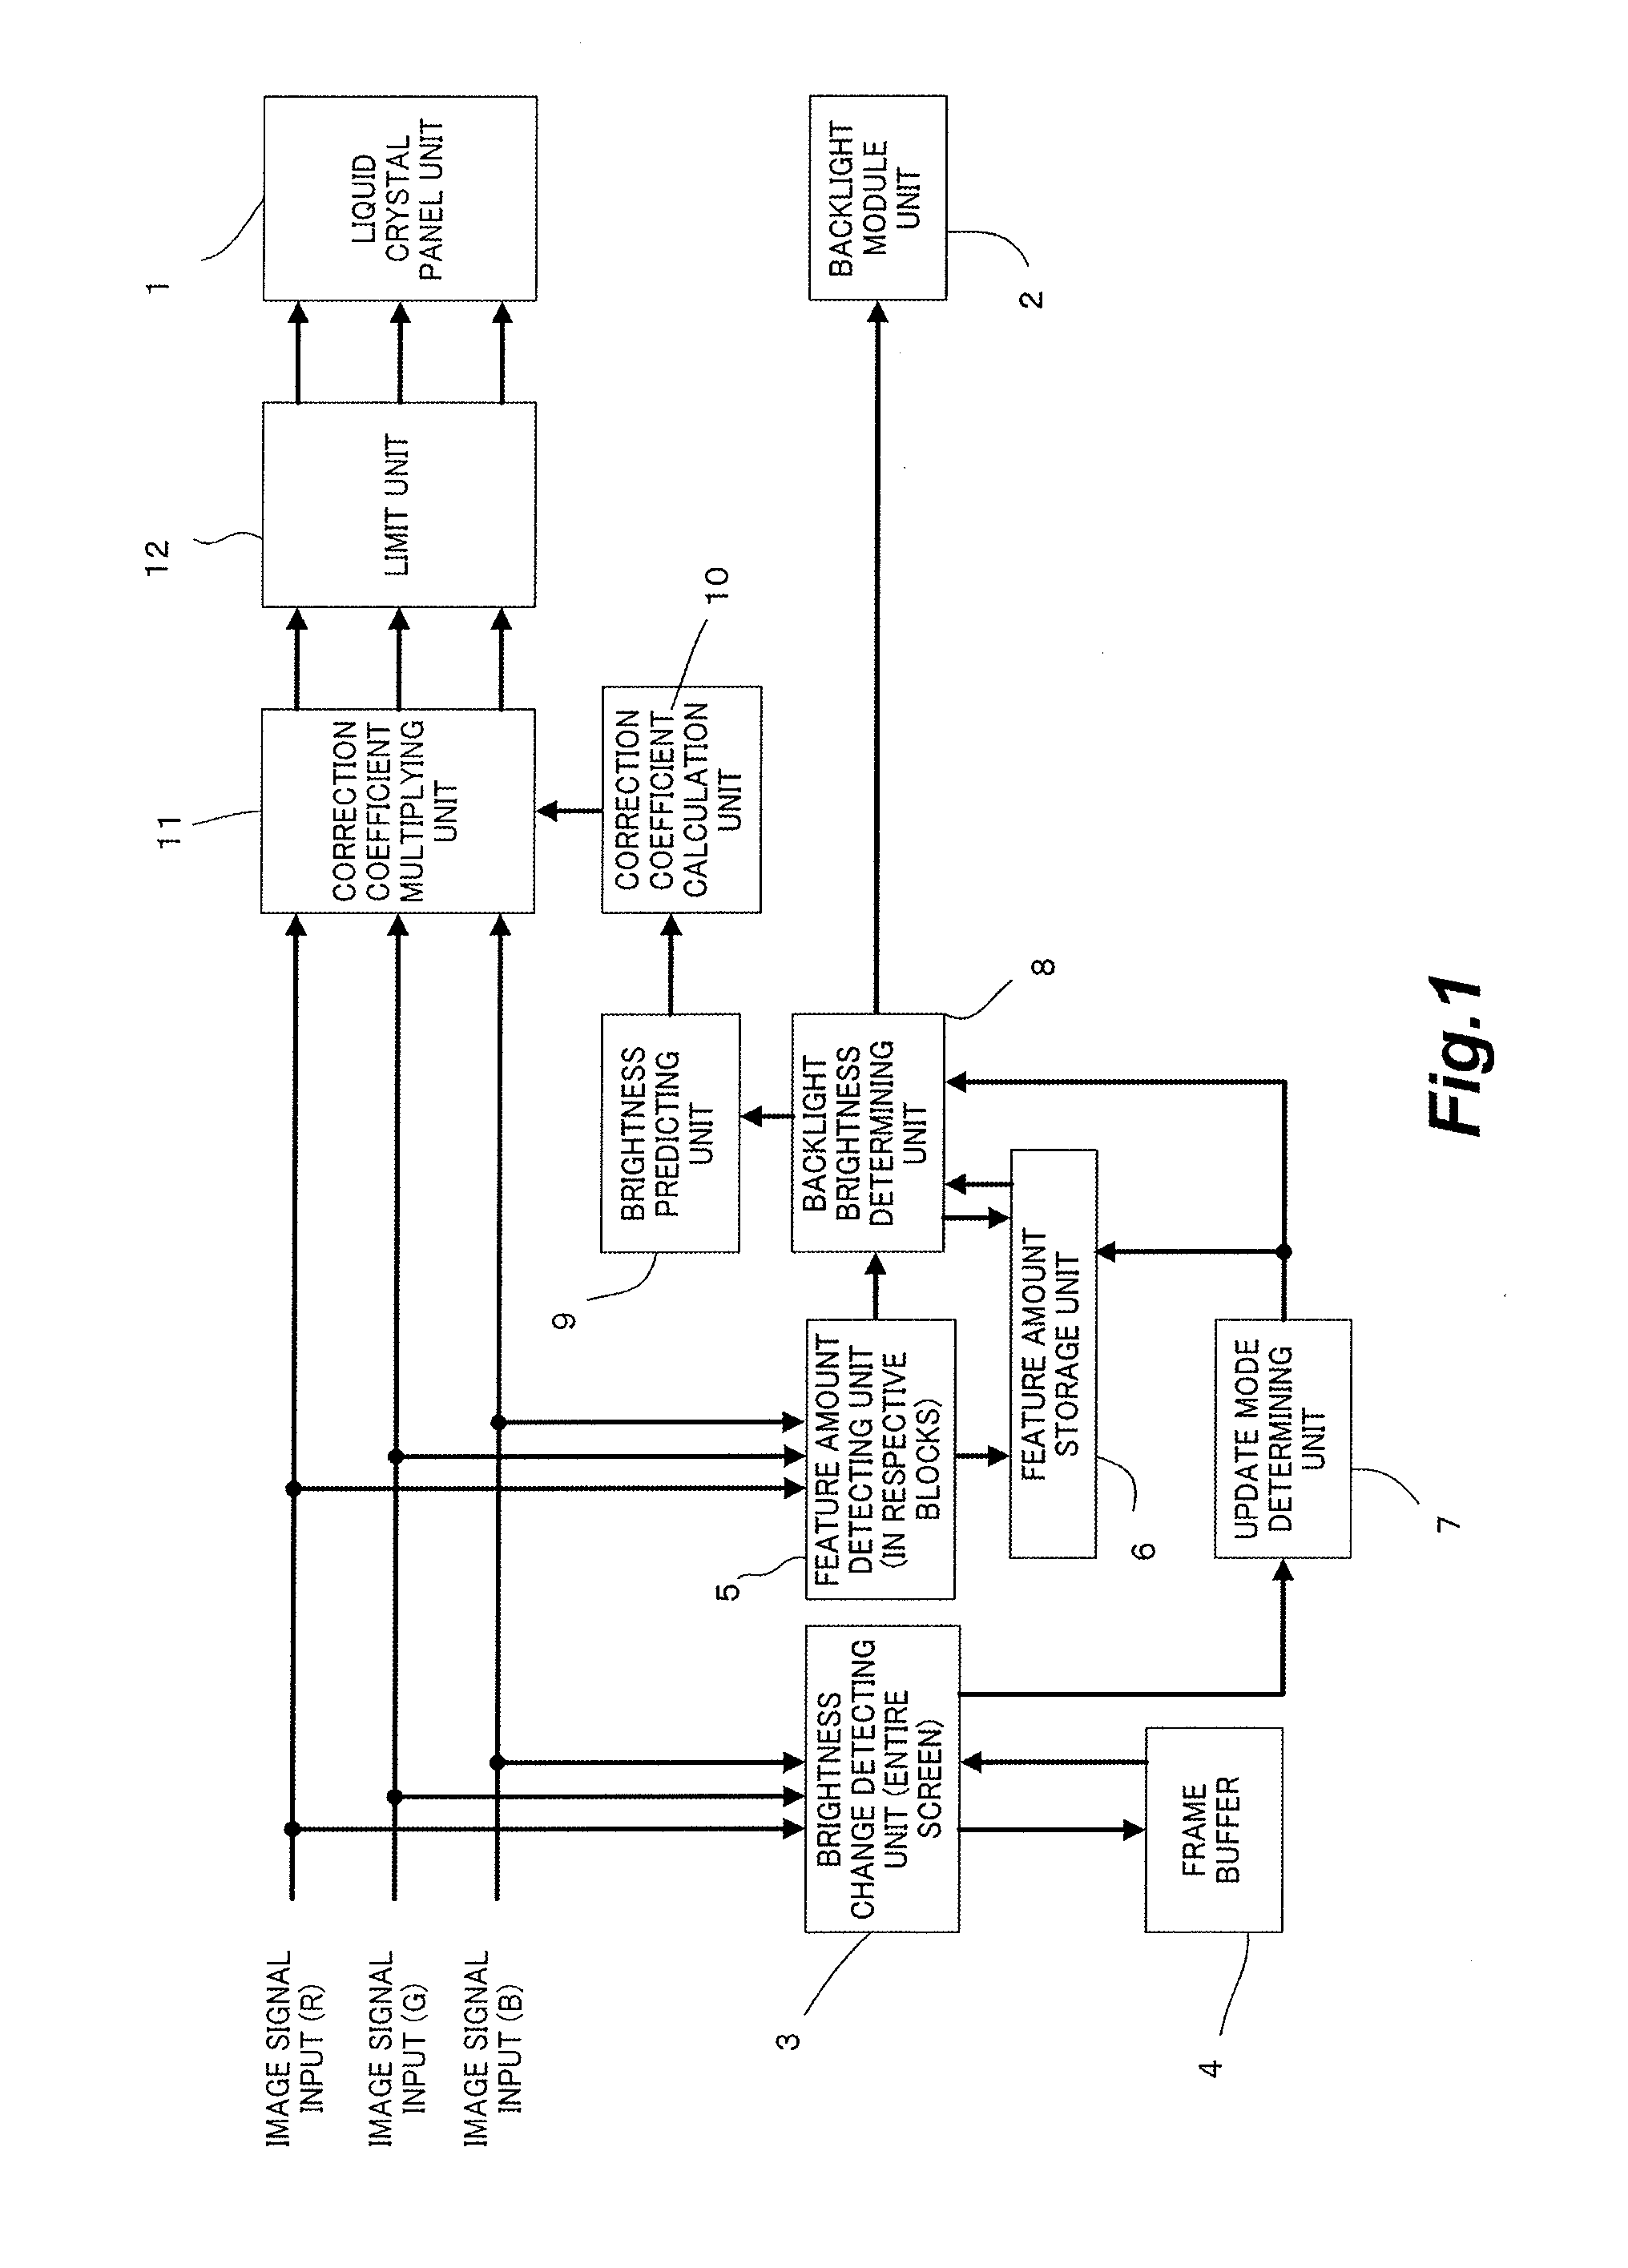 Image display apparatus and method of controlling same